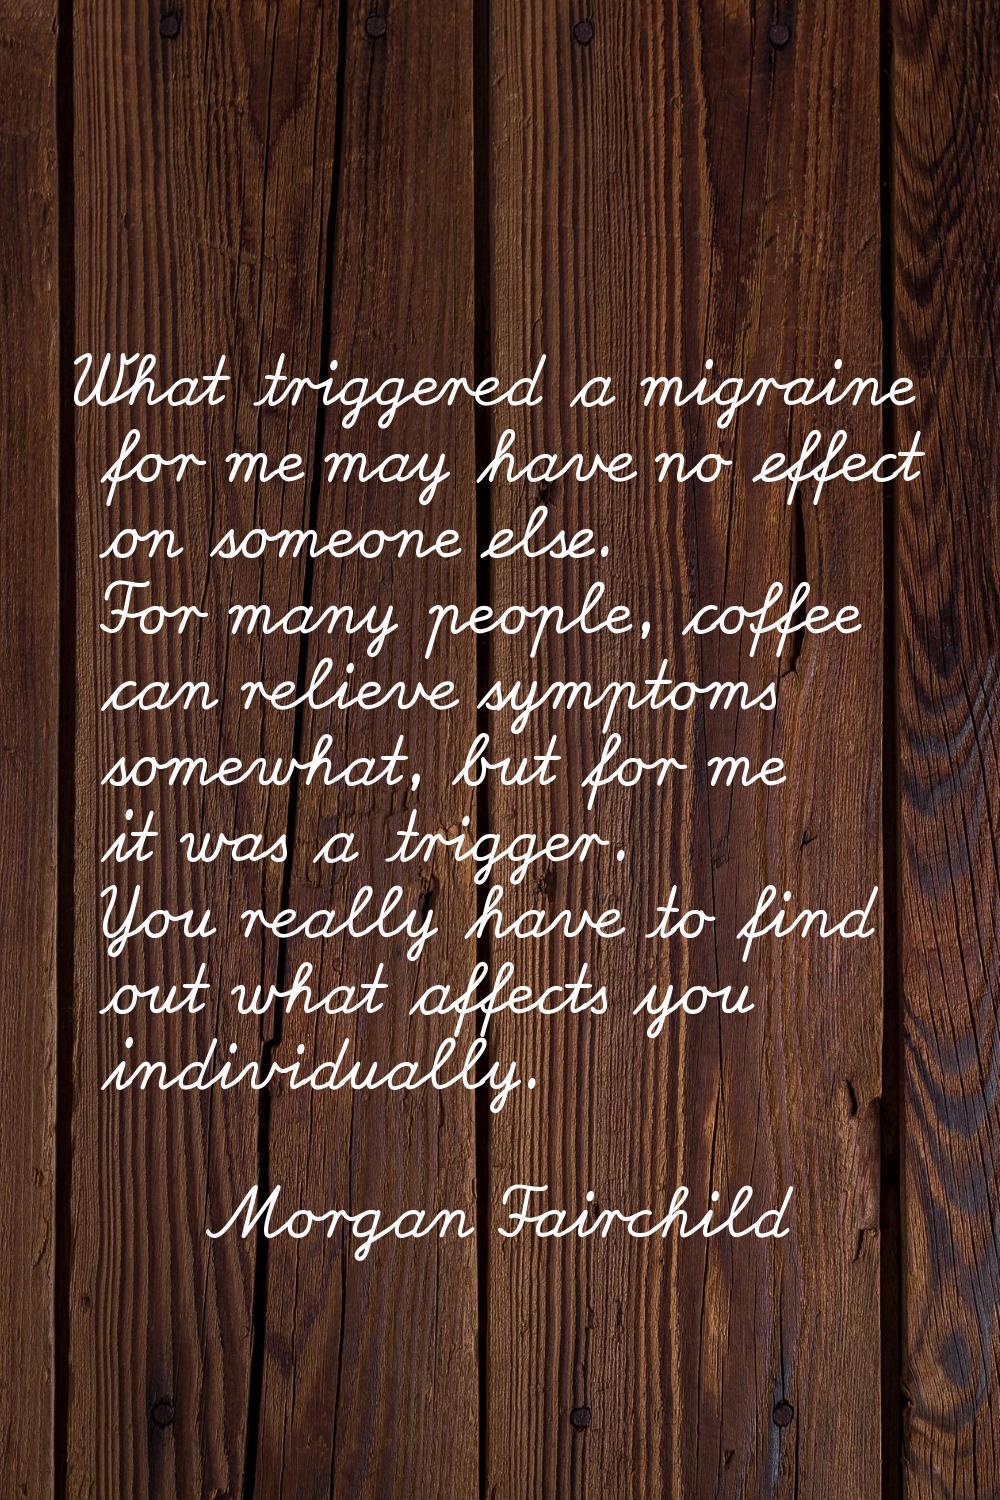 What triggered a migraine for me may have no effect on someone else. For many people, coffee can re